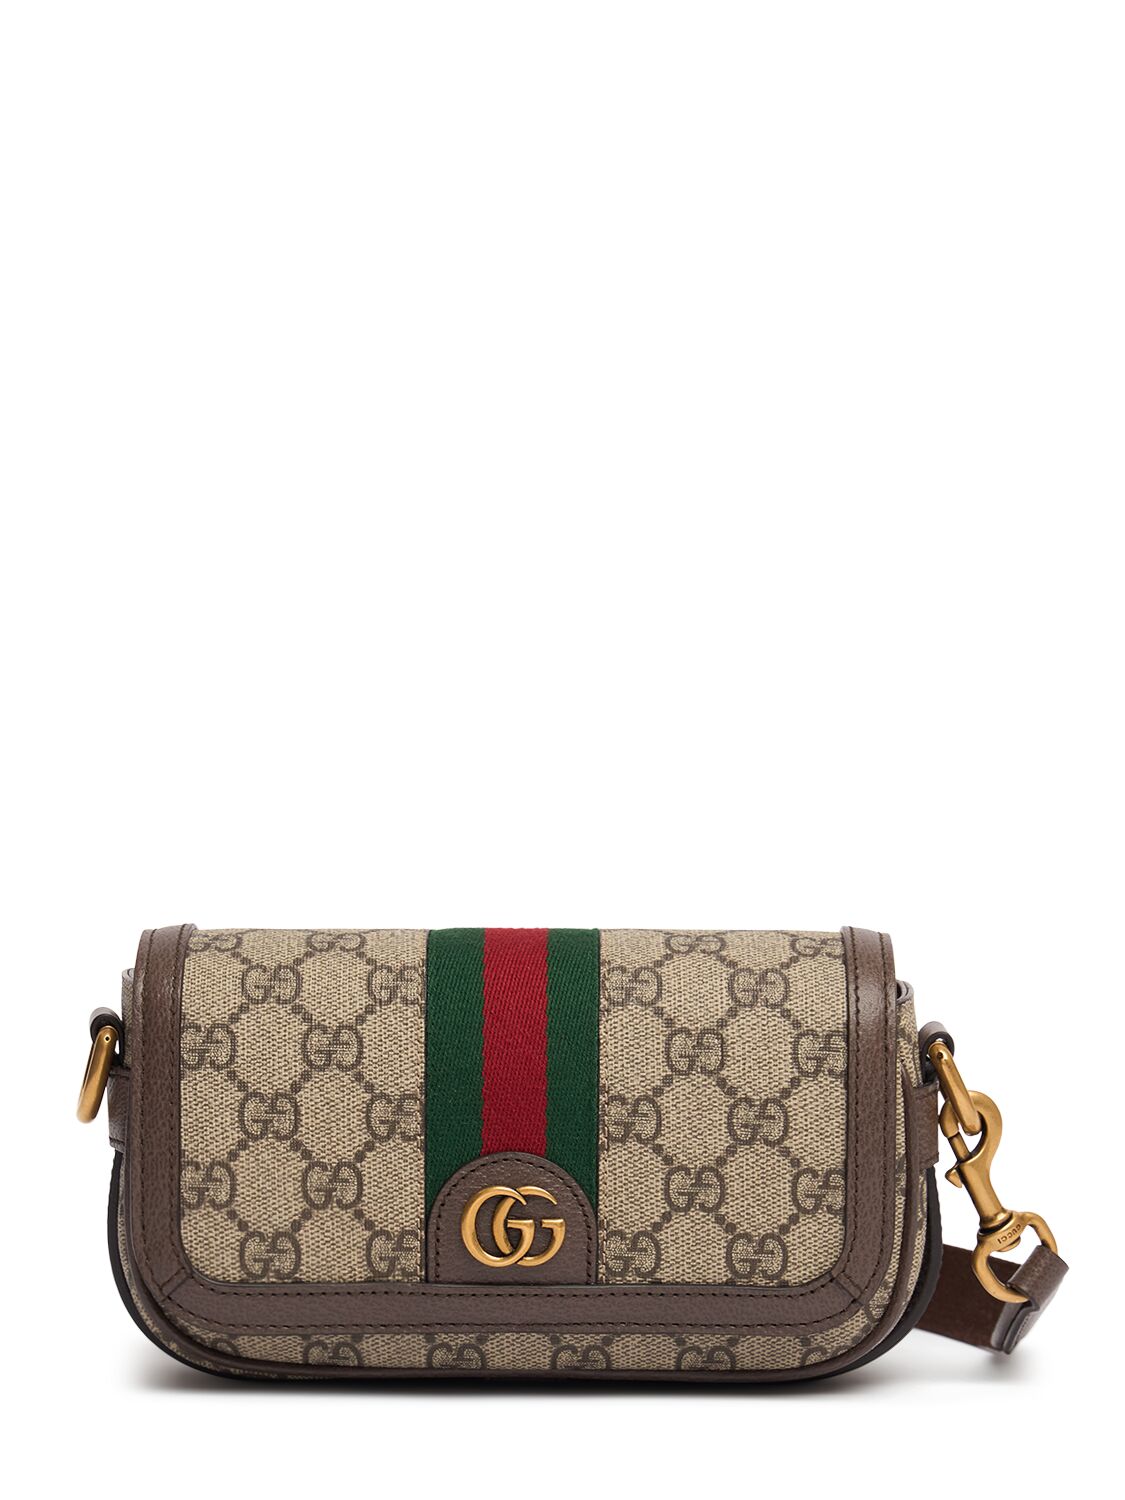 Gucci Ophidia Gg Crossbody Bag In Beige/brown